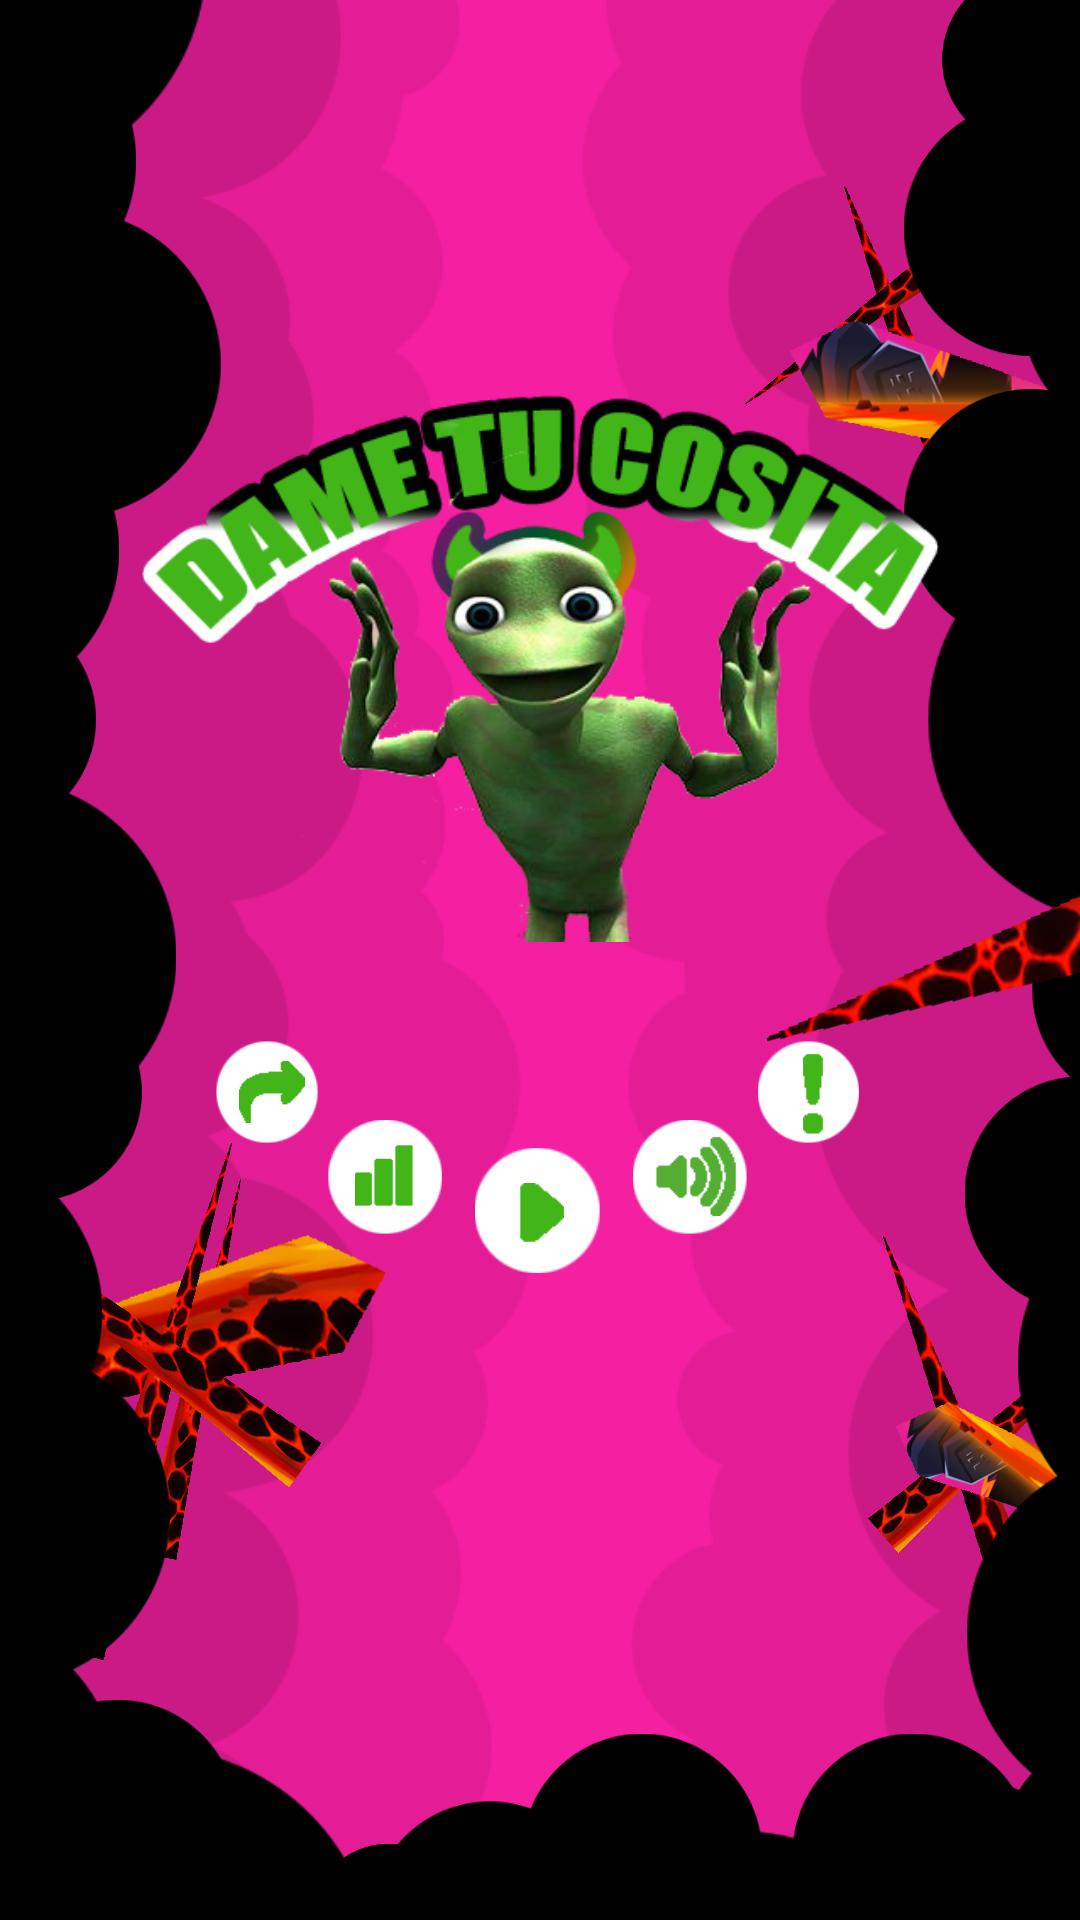 Dame Tu Cosita Jump Out For Android Apk Download - dame tu cosita roblox song code